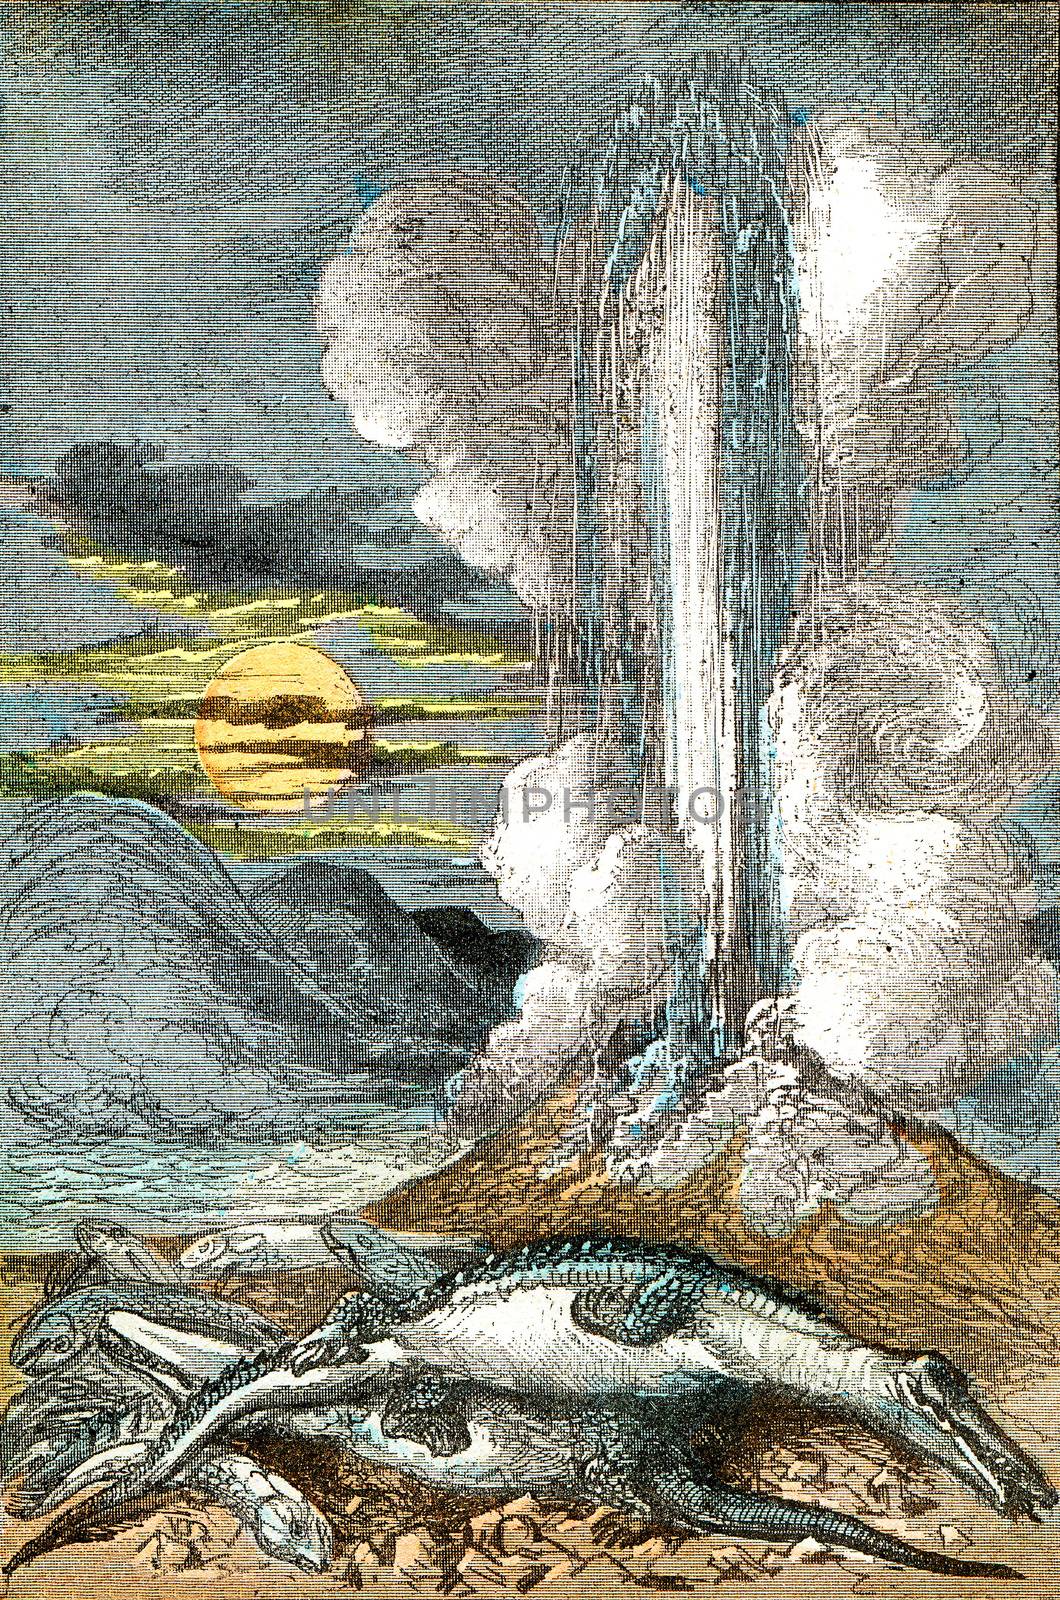 Eruptions of venereal thermal waters, at the period of the line, vintage engraved illustration. From Natural Creation and Living Beings.
